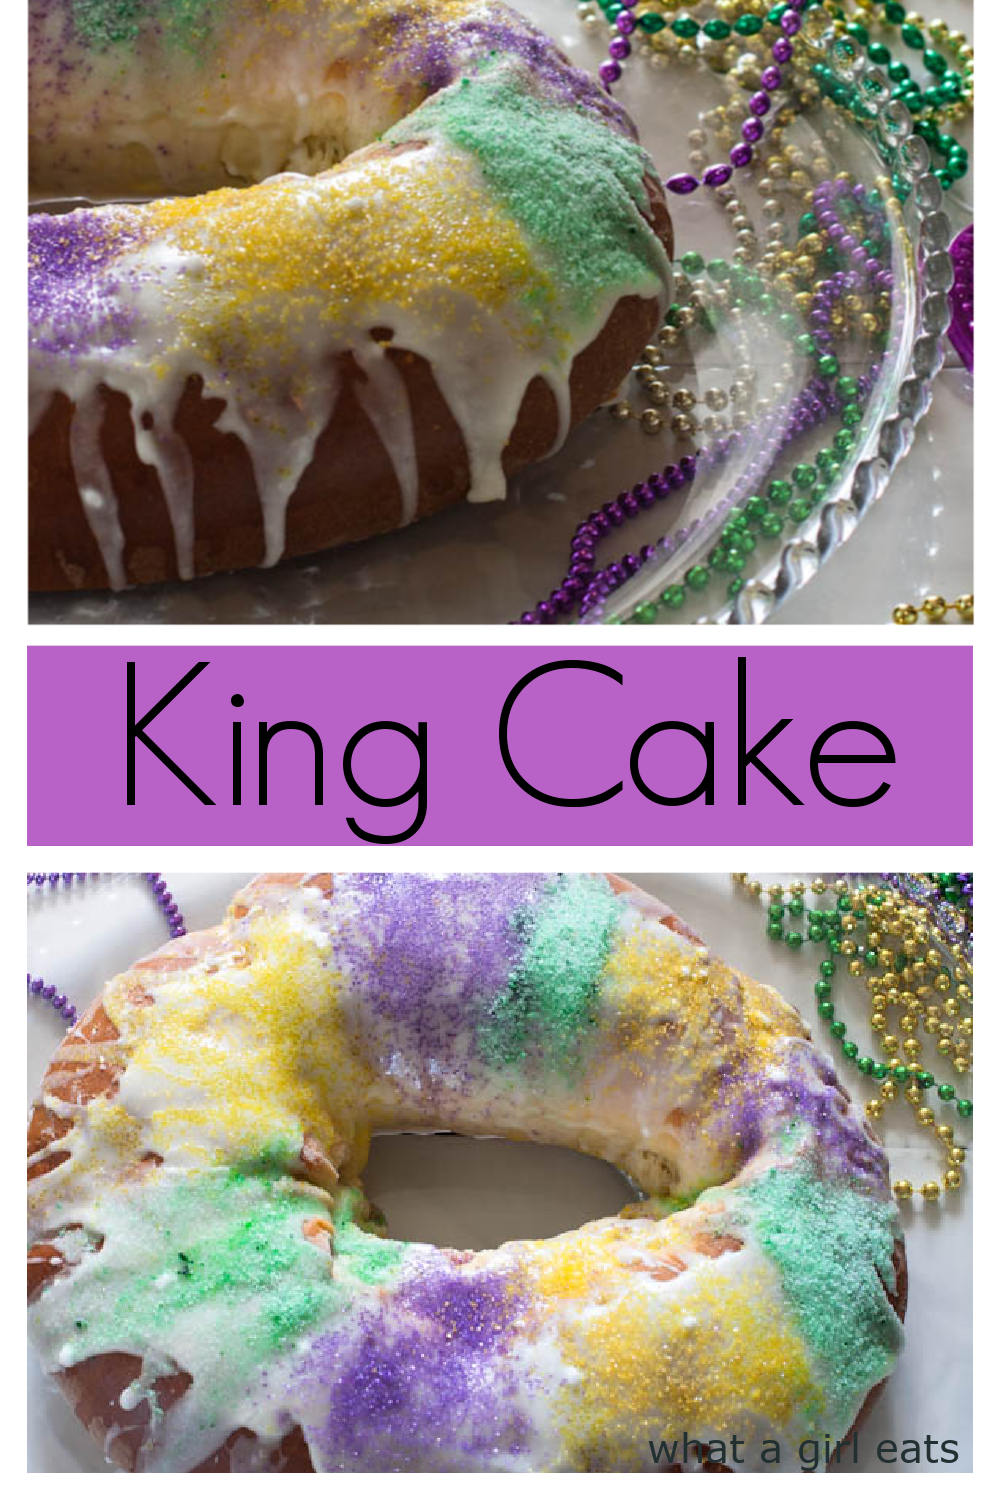 King Cake is a Mardi Gras staple. This cinnamon and cream cheese filled King Cake is made with a rich brioche dough with step by step instructions and video.